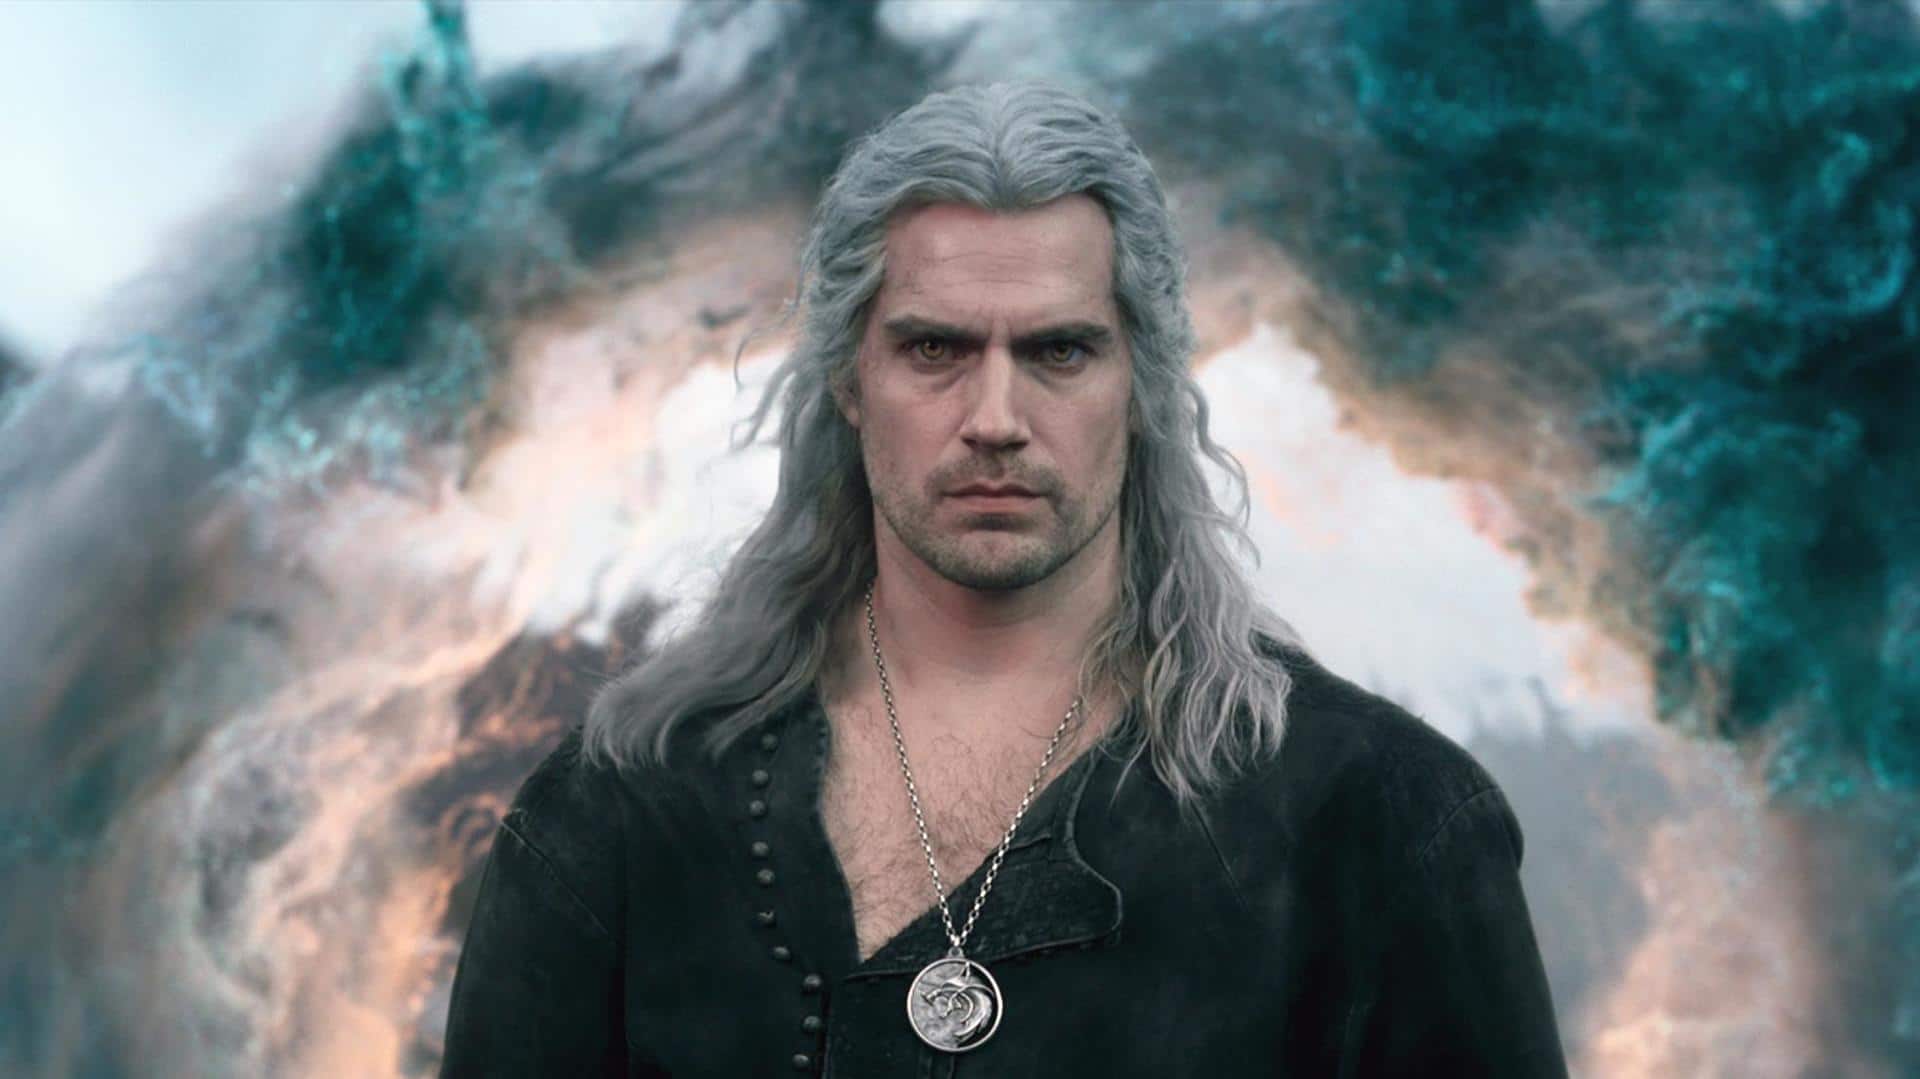 OTT: Netflix's 'The Witcher' Season 3 is streaming now